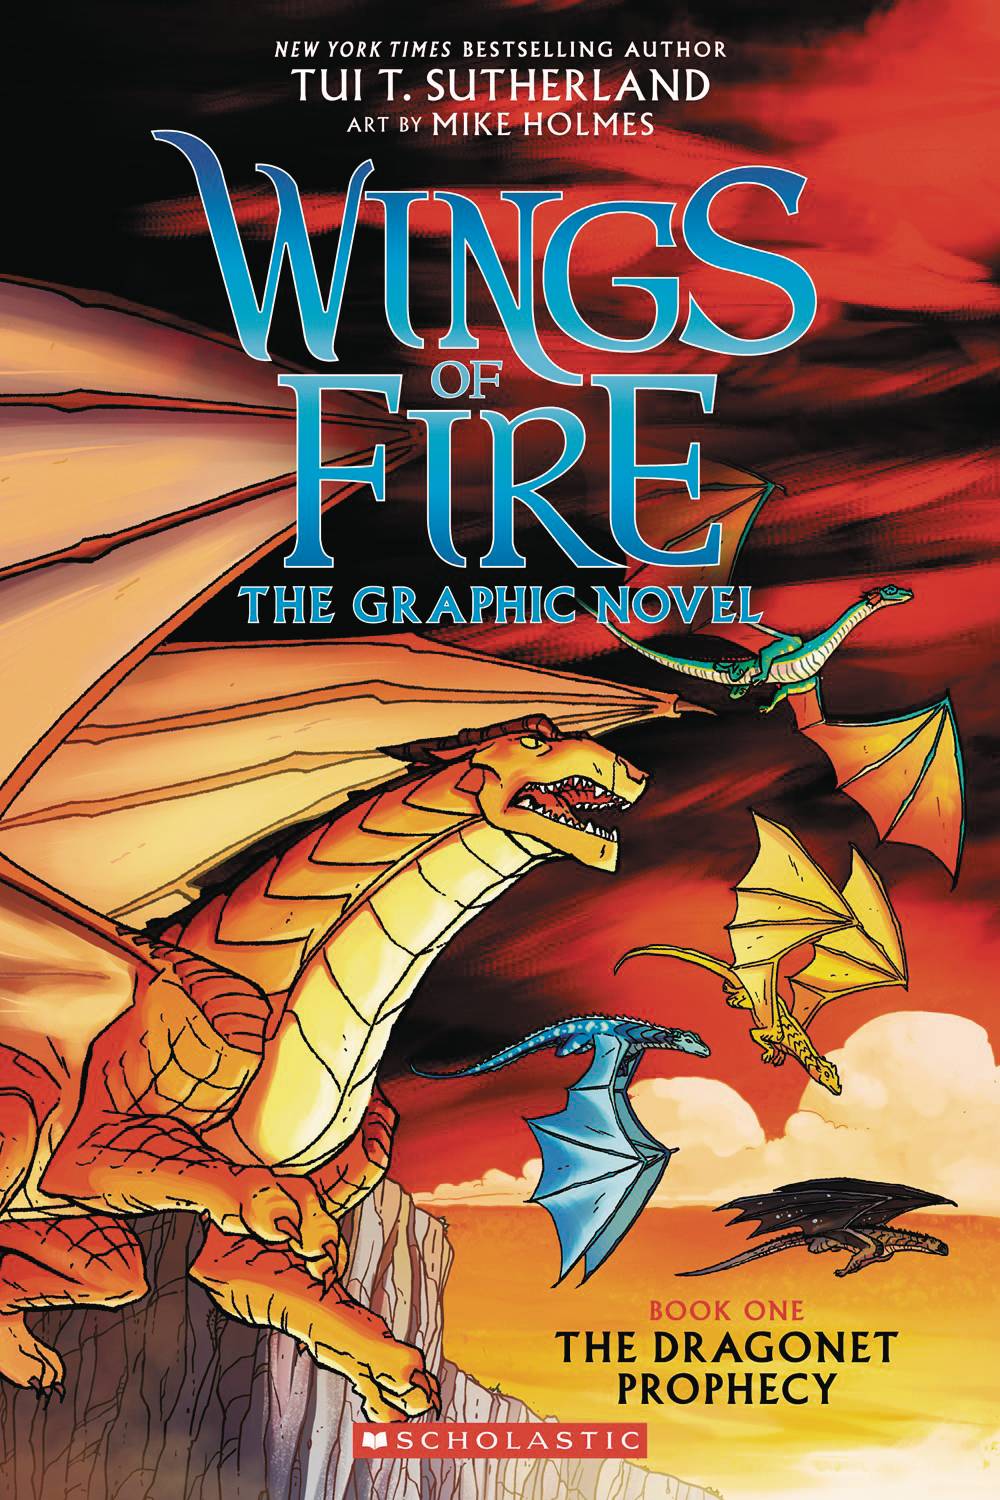 WINGS OF FIRE SC GN VOL 01 DRAGONET PROPHECY (C: 0-1-0)